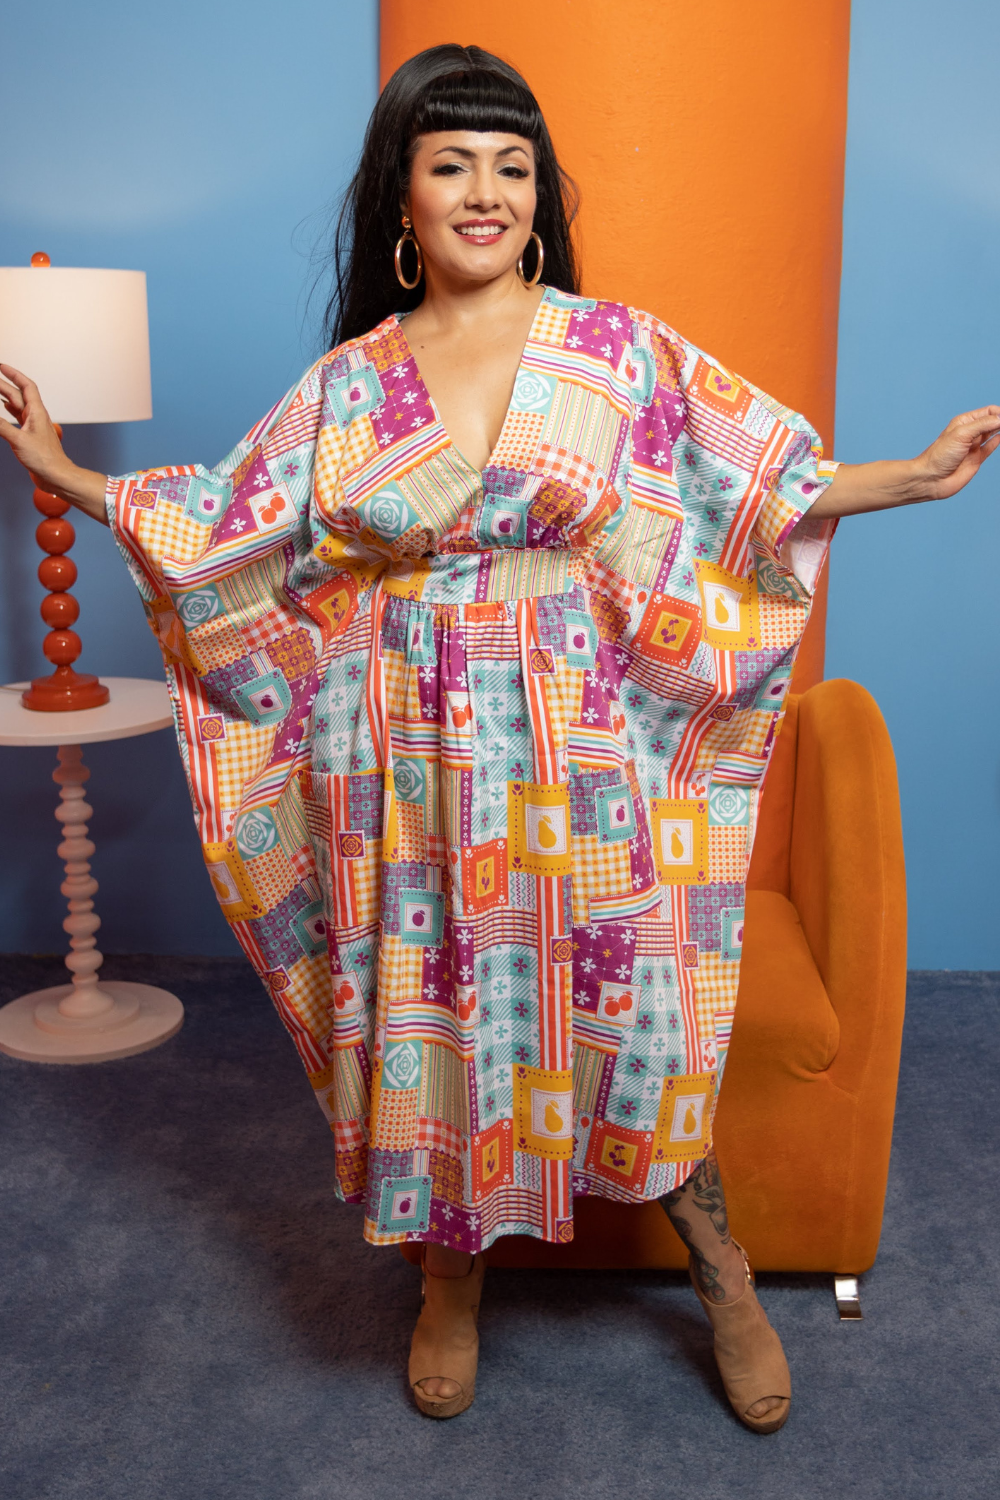 Dark haired model wearing a colorful dress with a patchwork design